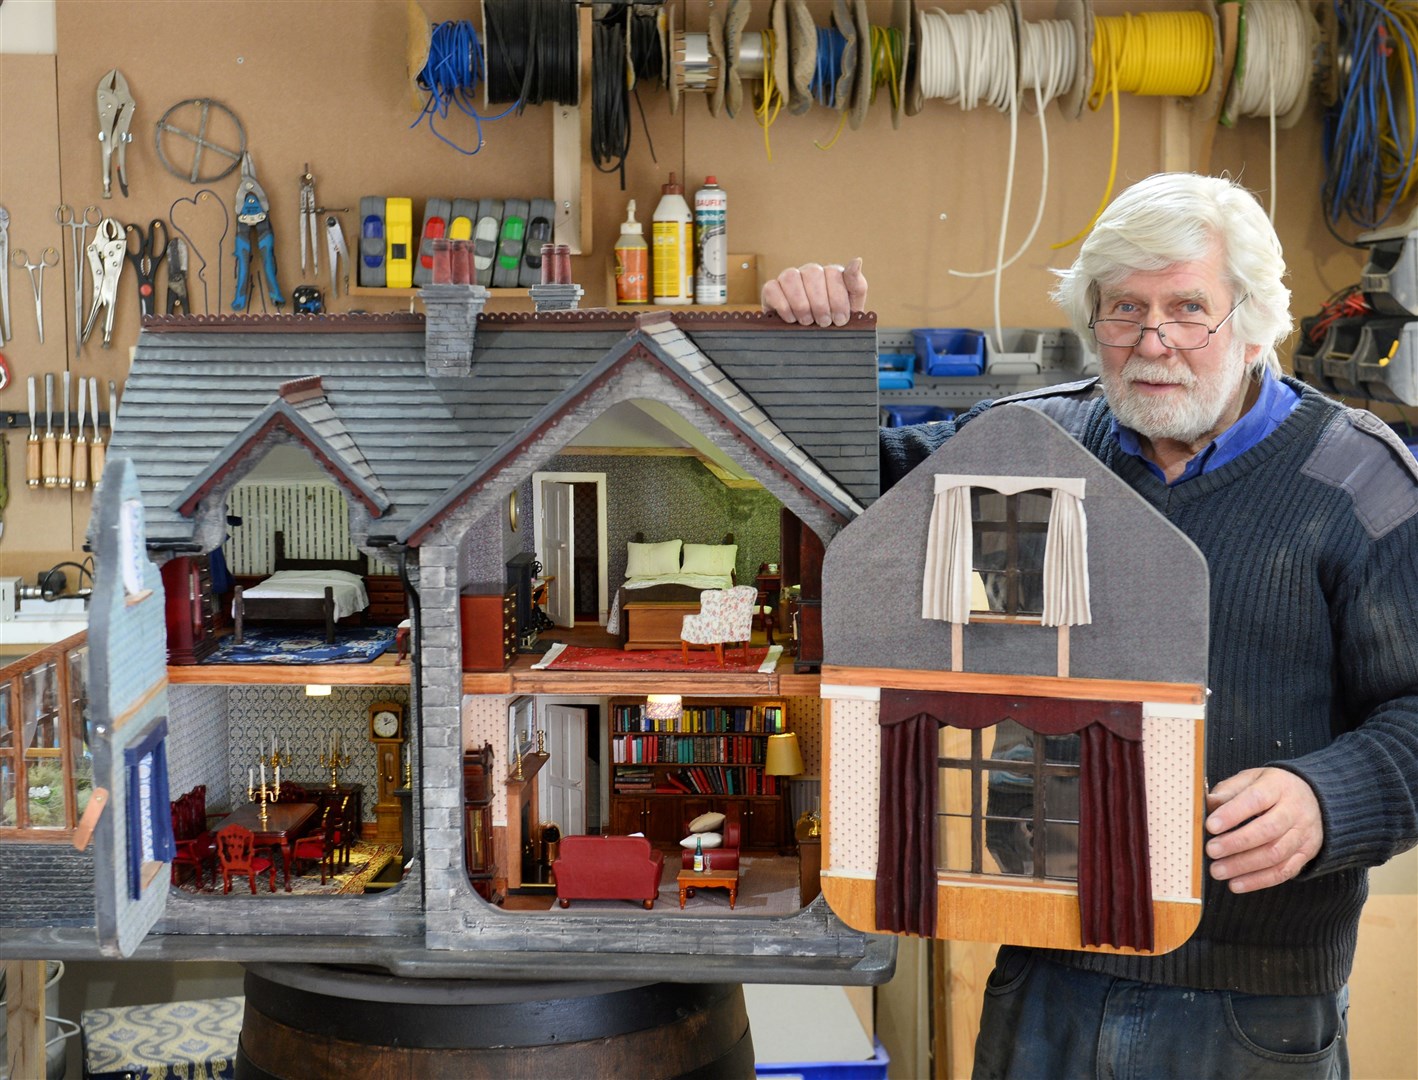 Mr Howker spent hundreds of hours making the doll's house during lockdown. Picture: Gary Anthony